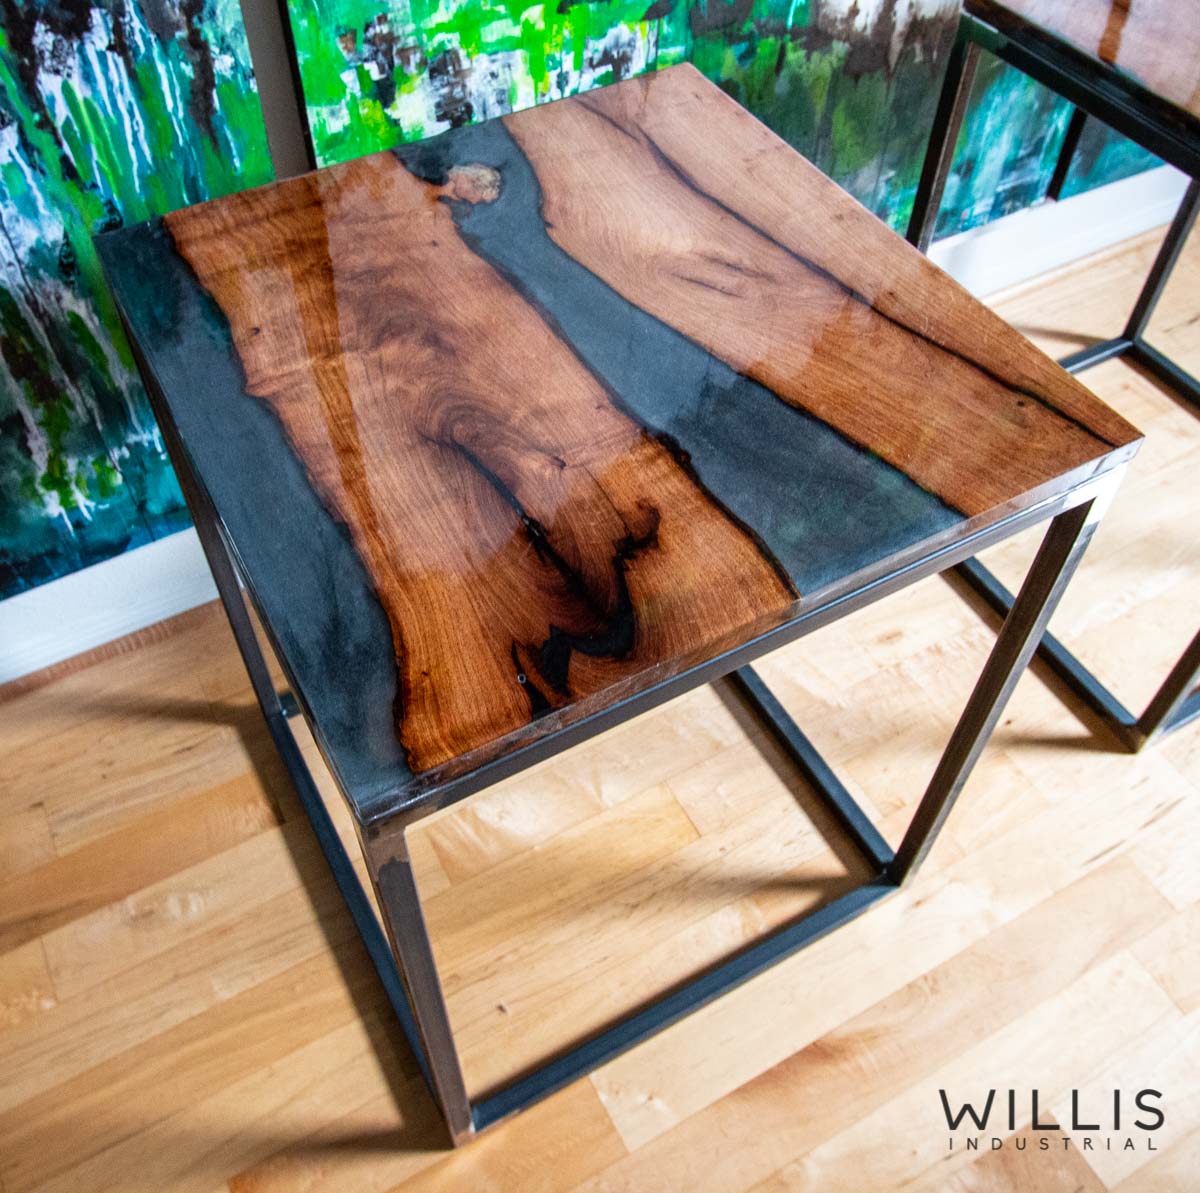 Willis Industrial Furniture | Rustic, Modern Furniture | Mesquite Inverted Live Edge Boards with Transluscent Smoke Epoxy & Black Painted Steel Cube Frame